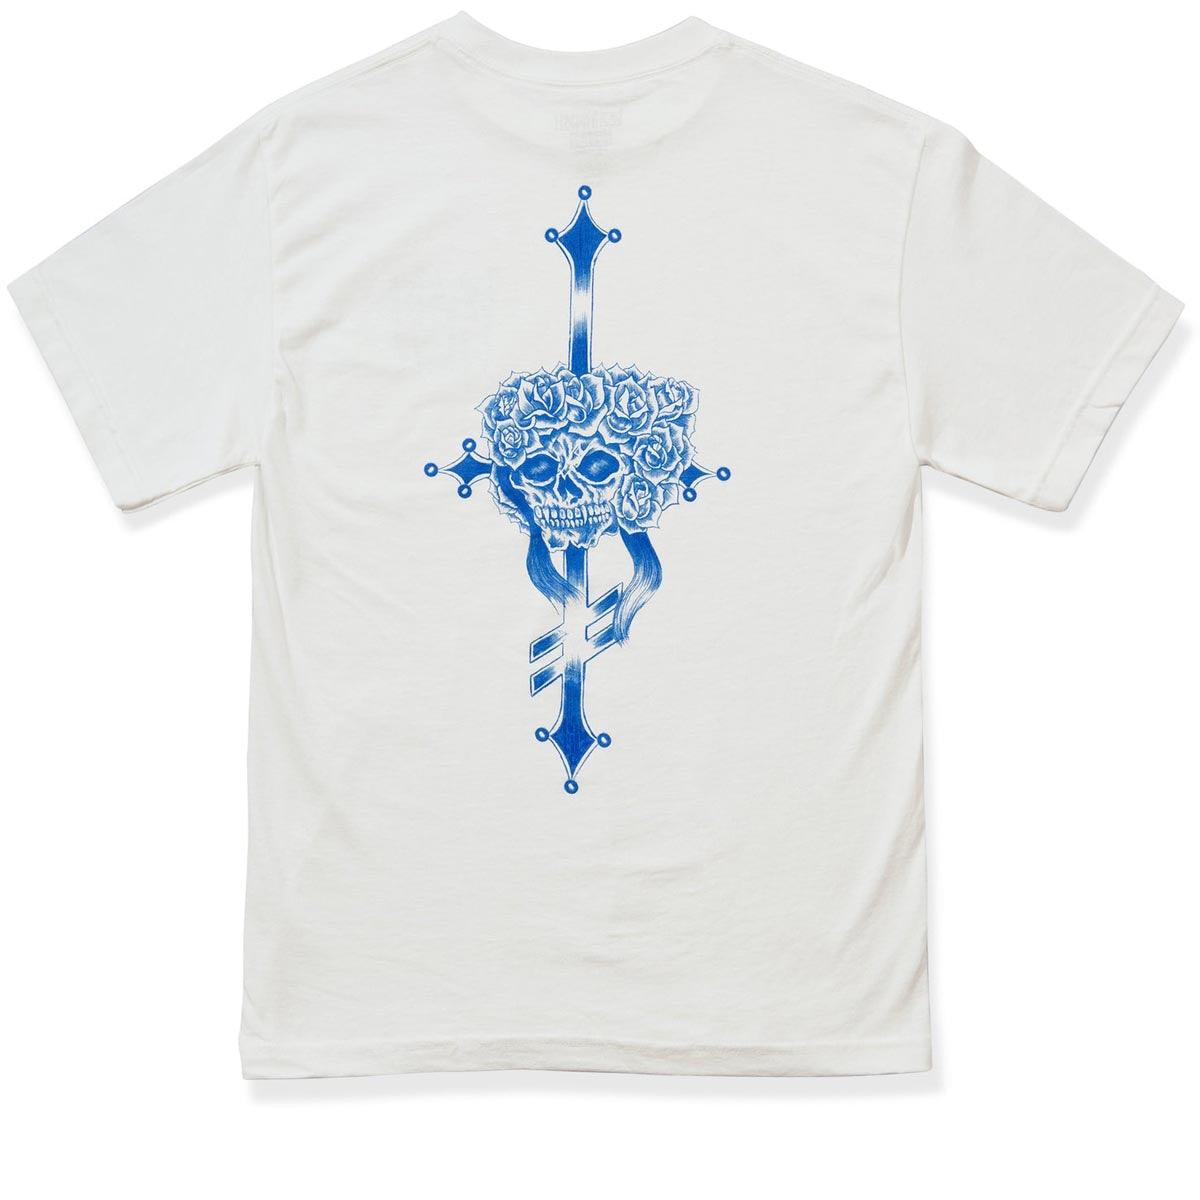 Deathwish Out Ta Get Me T-Shirt - White image 1